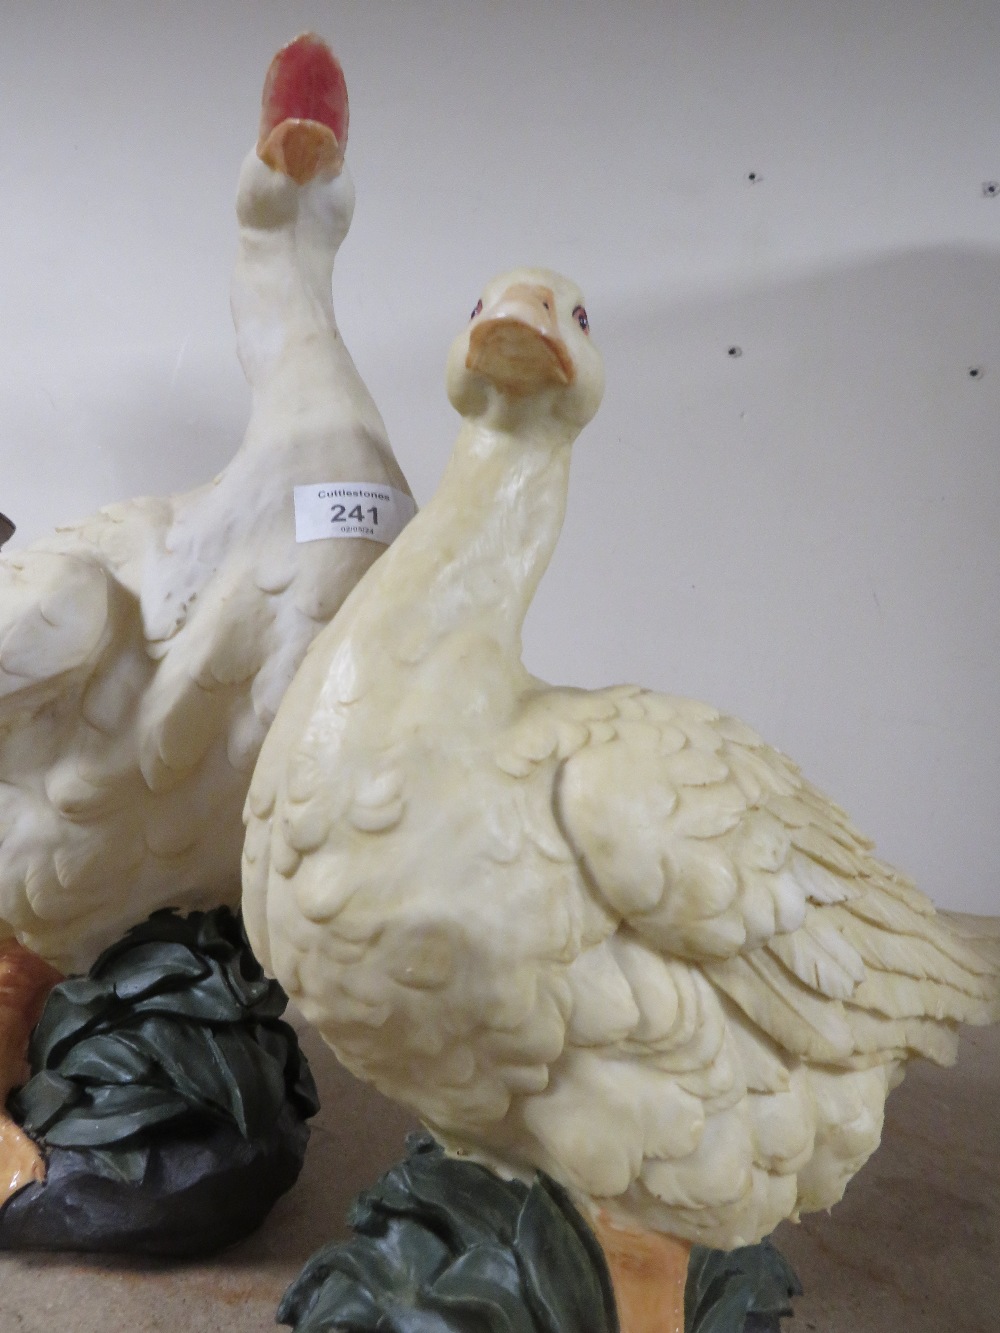 TWO RESIN MODELS OF GEESE - Image 5 of 5